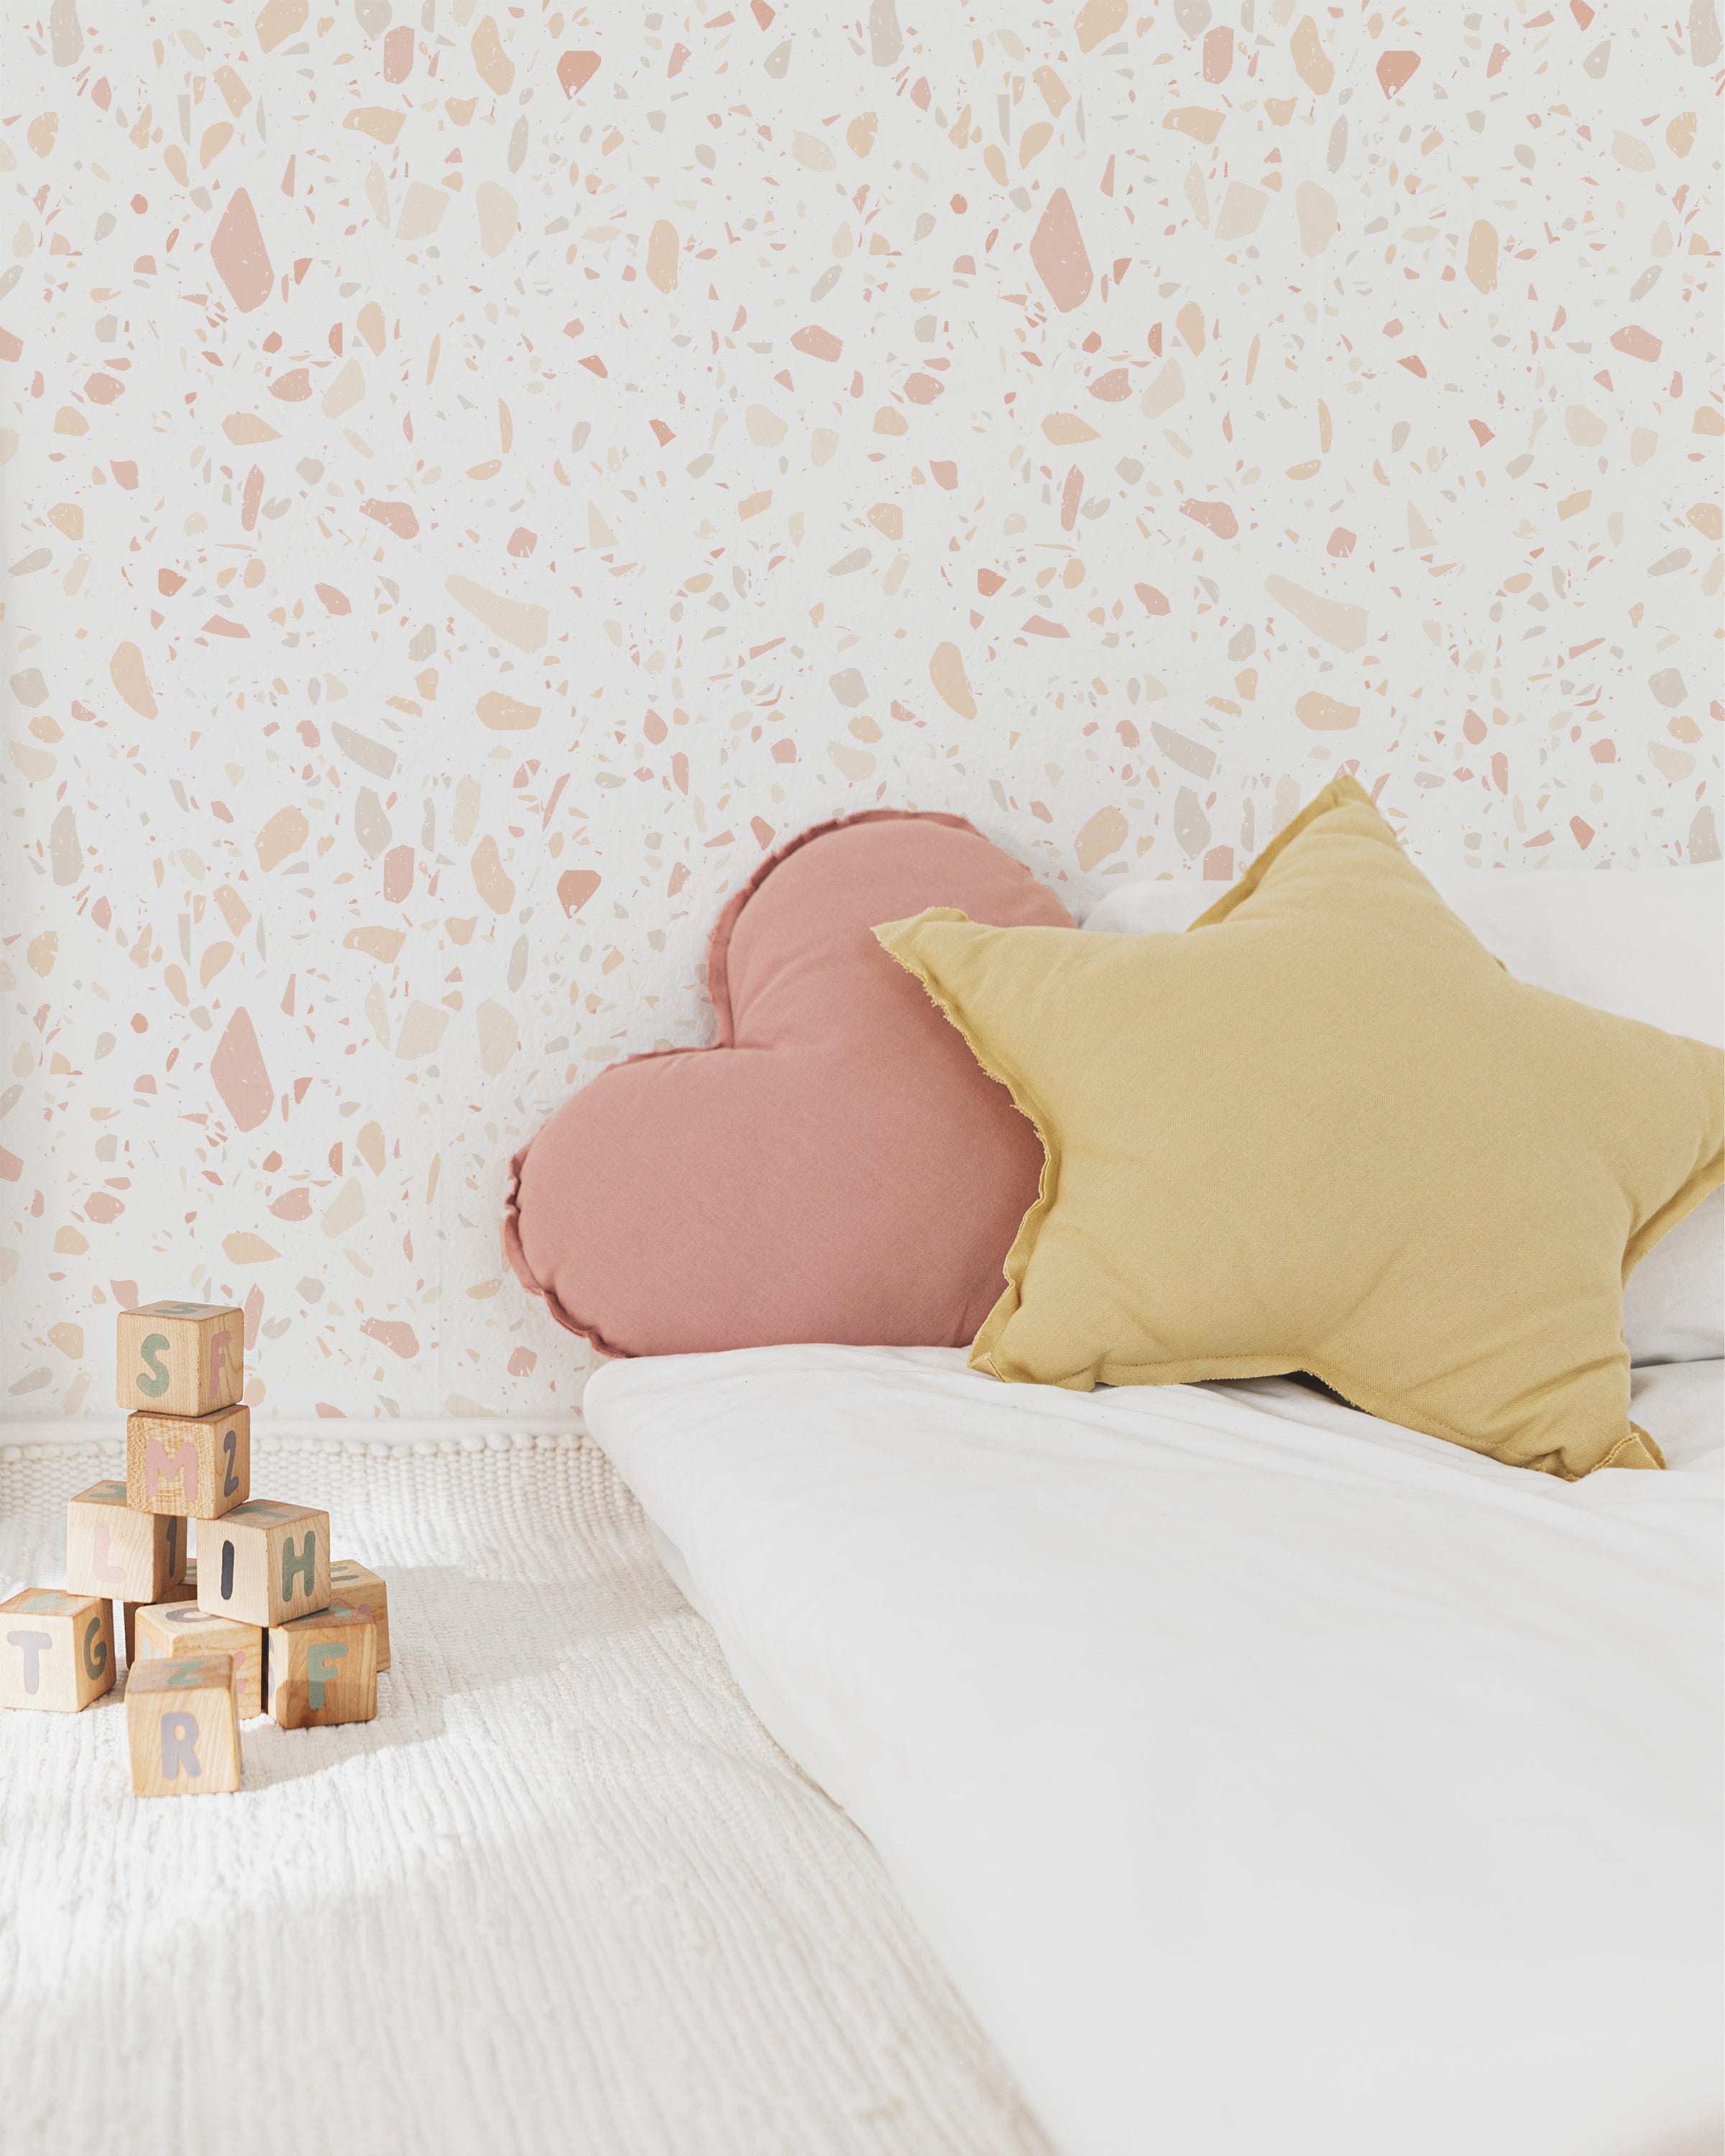 A nursery room featuring the Pink Terrazzo Wallpaper which adds a subtle and modern backdrop. The wallpaper complements the room's light, pastel-themed decor including soft pillows and children's toys, creating a cheerful and contemporary space.